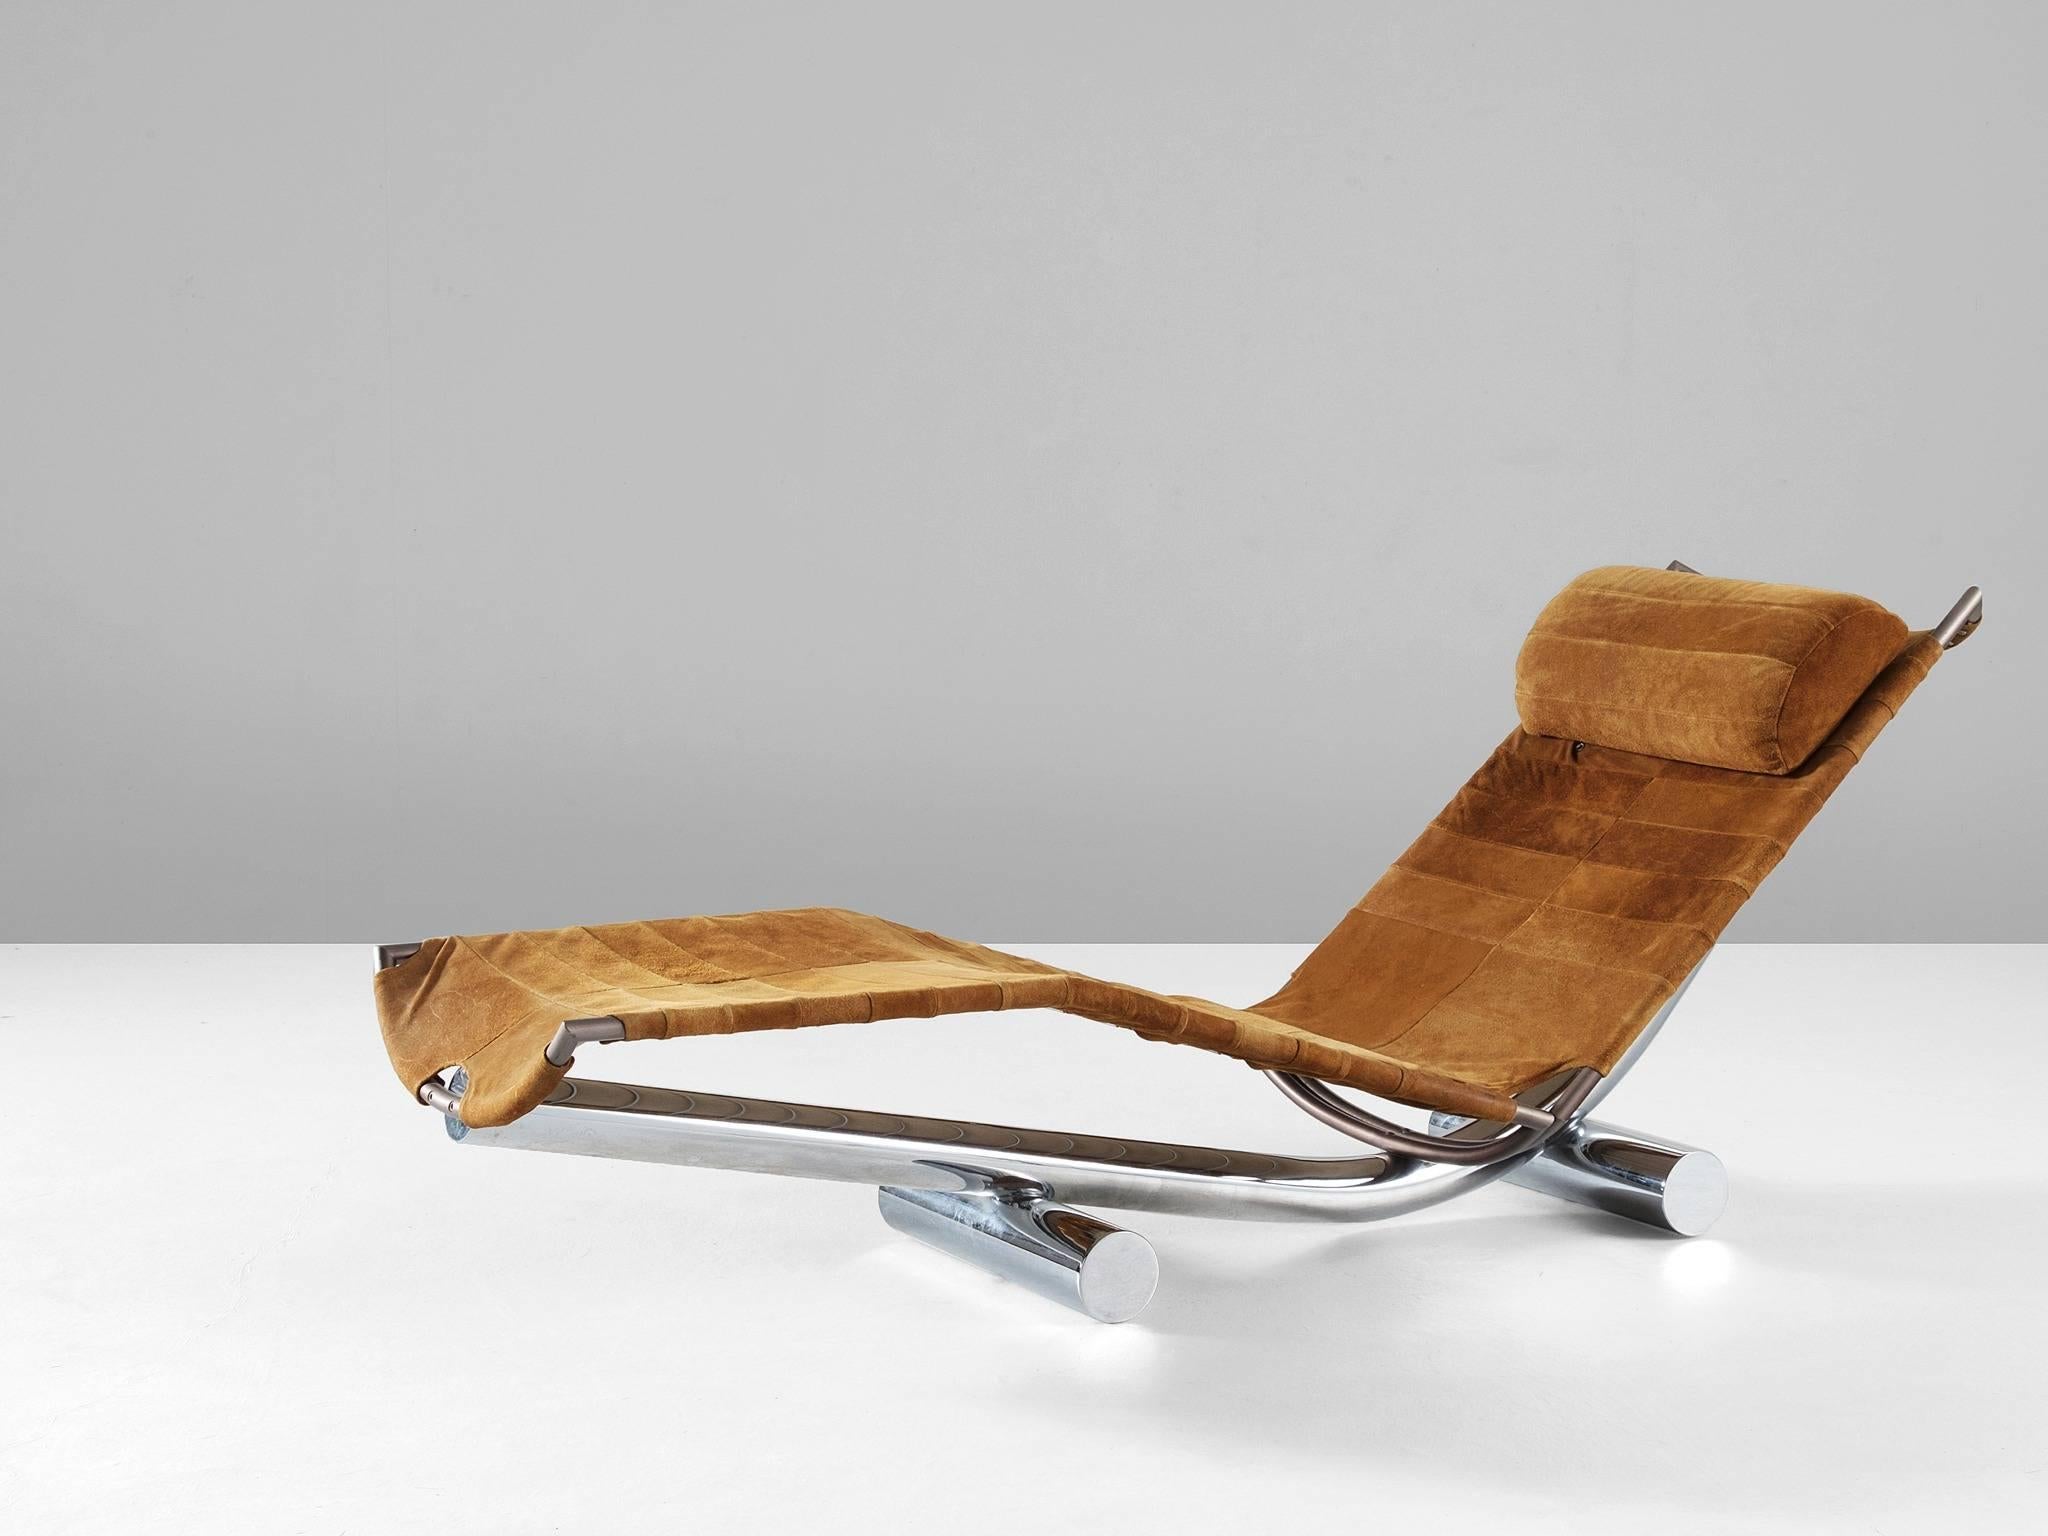 Chaise longue model 'Chariot', in chrome plated steel and suede, by Paul Tuttle for Strässle, Switzerland/ United States 1972. 

Very complete daybed by American designer Paul Tuttle. This chaise comes with two different loose cushions, which can